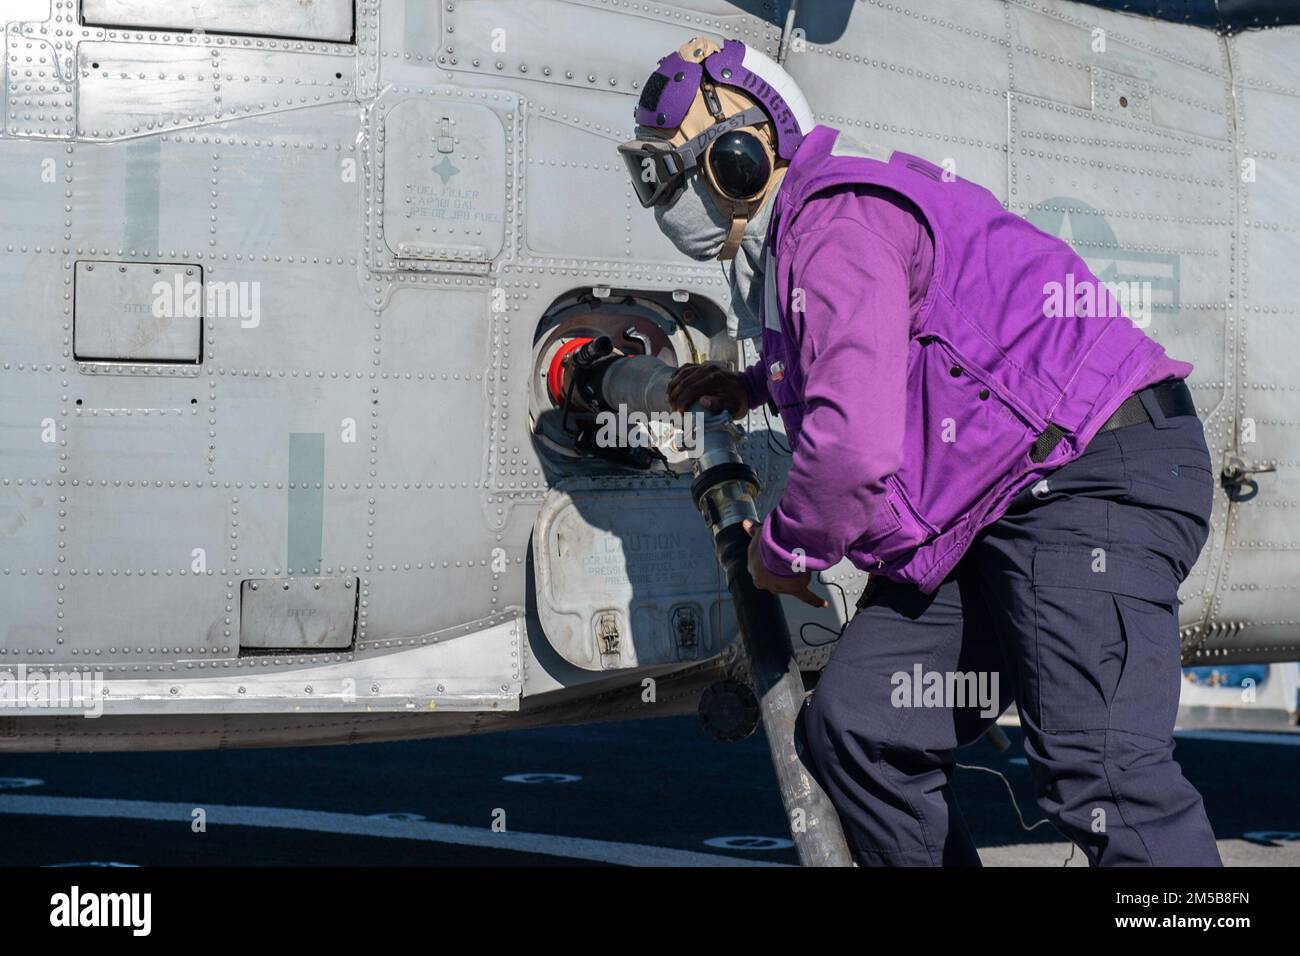 220218-N-HG846-2037 ADRIATIC SEA (Feb. 18, 2022) – Gas Turbine Systems Technician 2nd Class Demario Spencer, from Monroe, La., connects a fuel probe during helicopter refueling with a MH-60S Sea Hawk helicopter assigned to the “Dragon Slayers” of Helicopter Sea Combat Squadron (HSC-11) aboard Arleigh Burke-class guided-missile destroyer USS Mitscher (DDG 57), Feb. 18, 2022. Mitscher is deployed with the Harry S. Truman Carrier Strike Group on a scheduled deployment in the U.S. Sixth Fleet area of operations in support of naval operations to maintain maritime stability and security, and defend Stock Photo